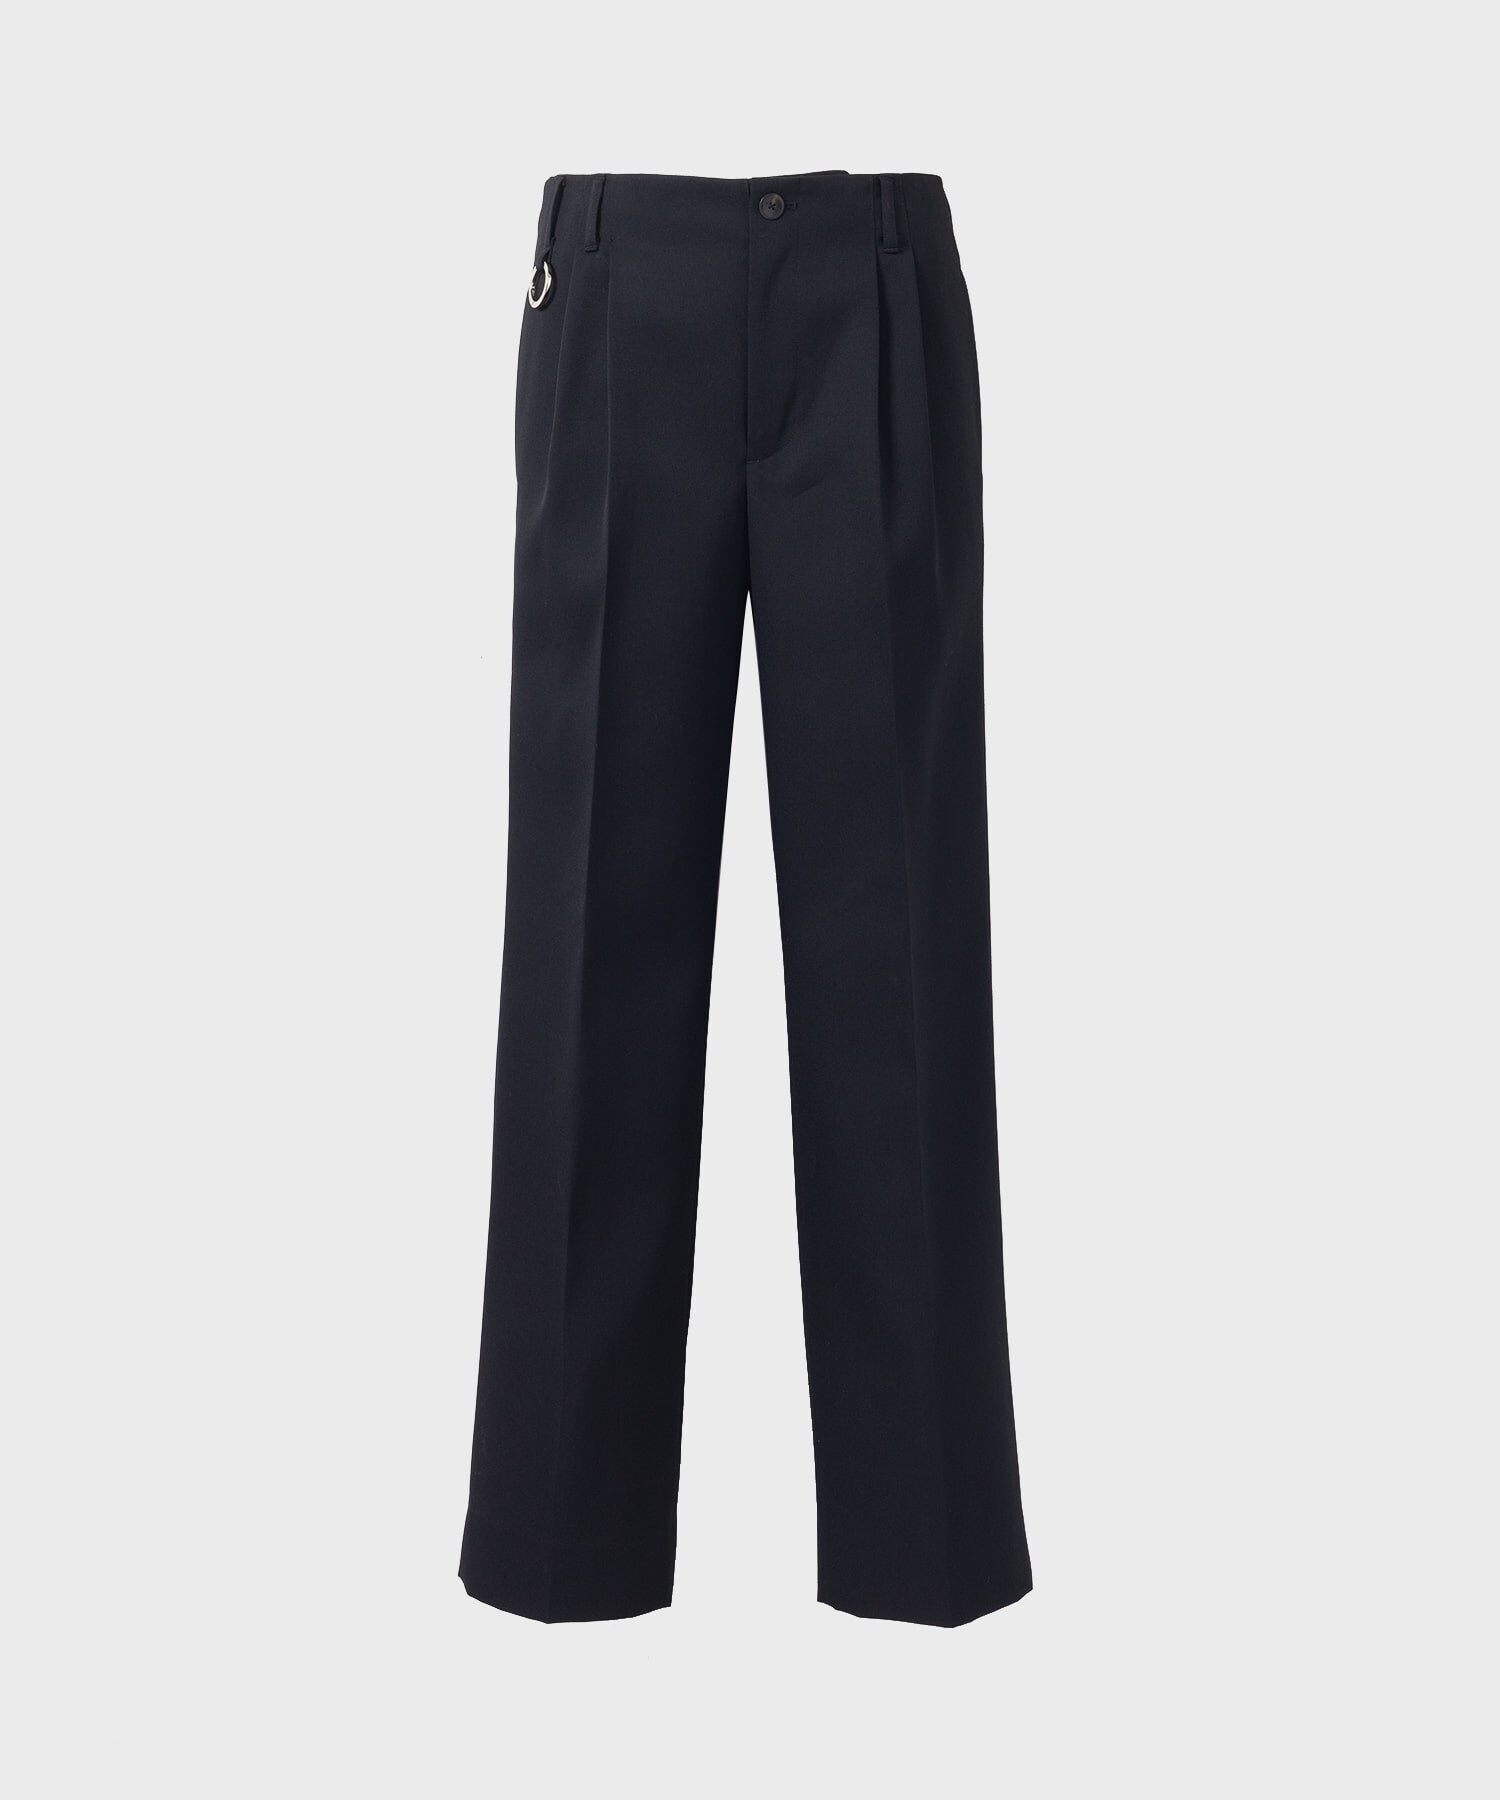 QUINN/Wide Tailored Pants